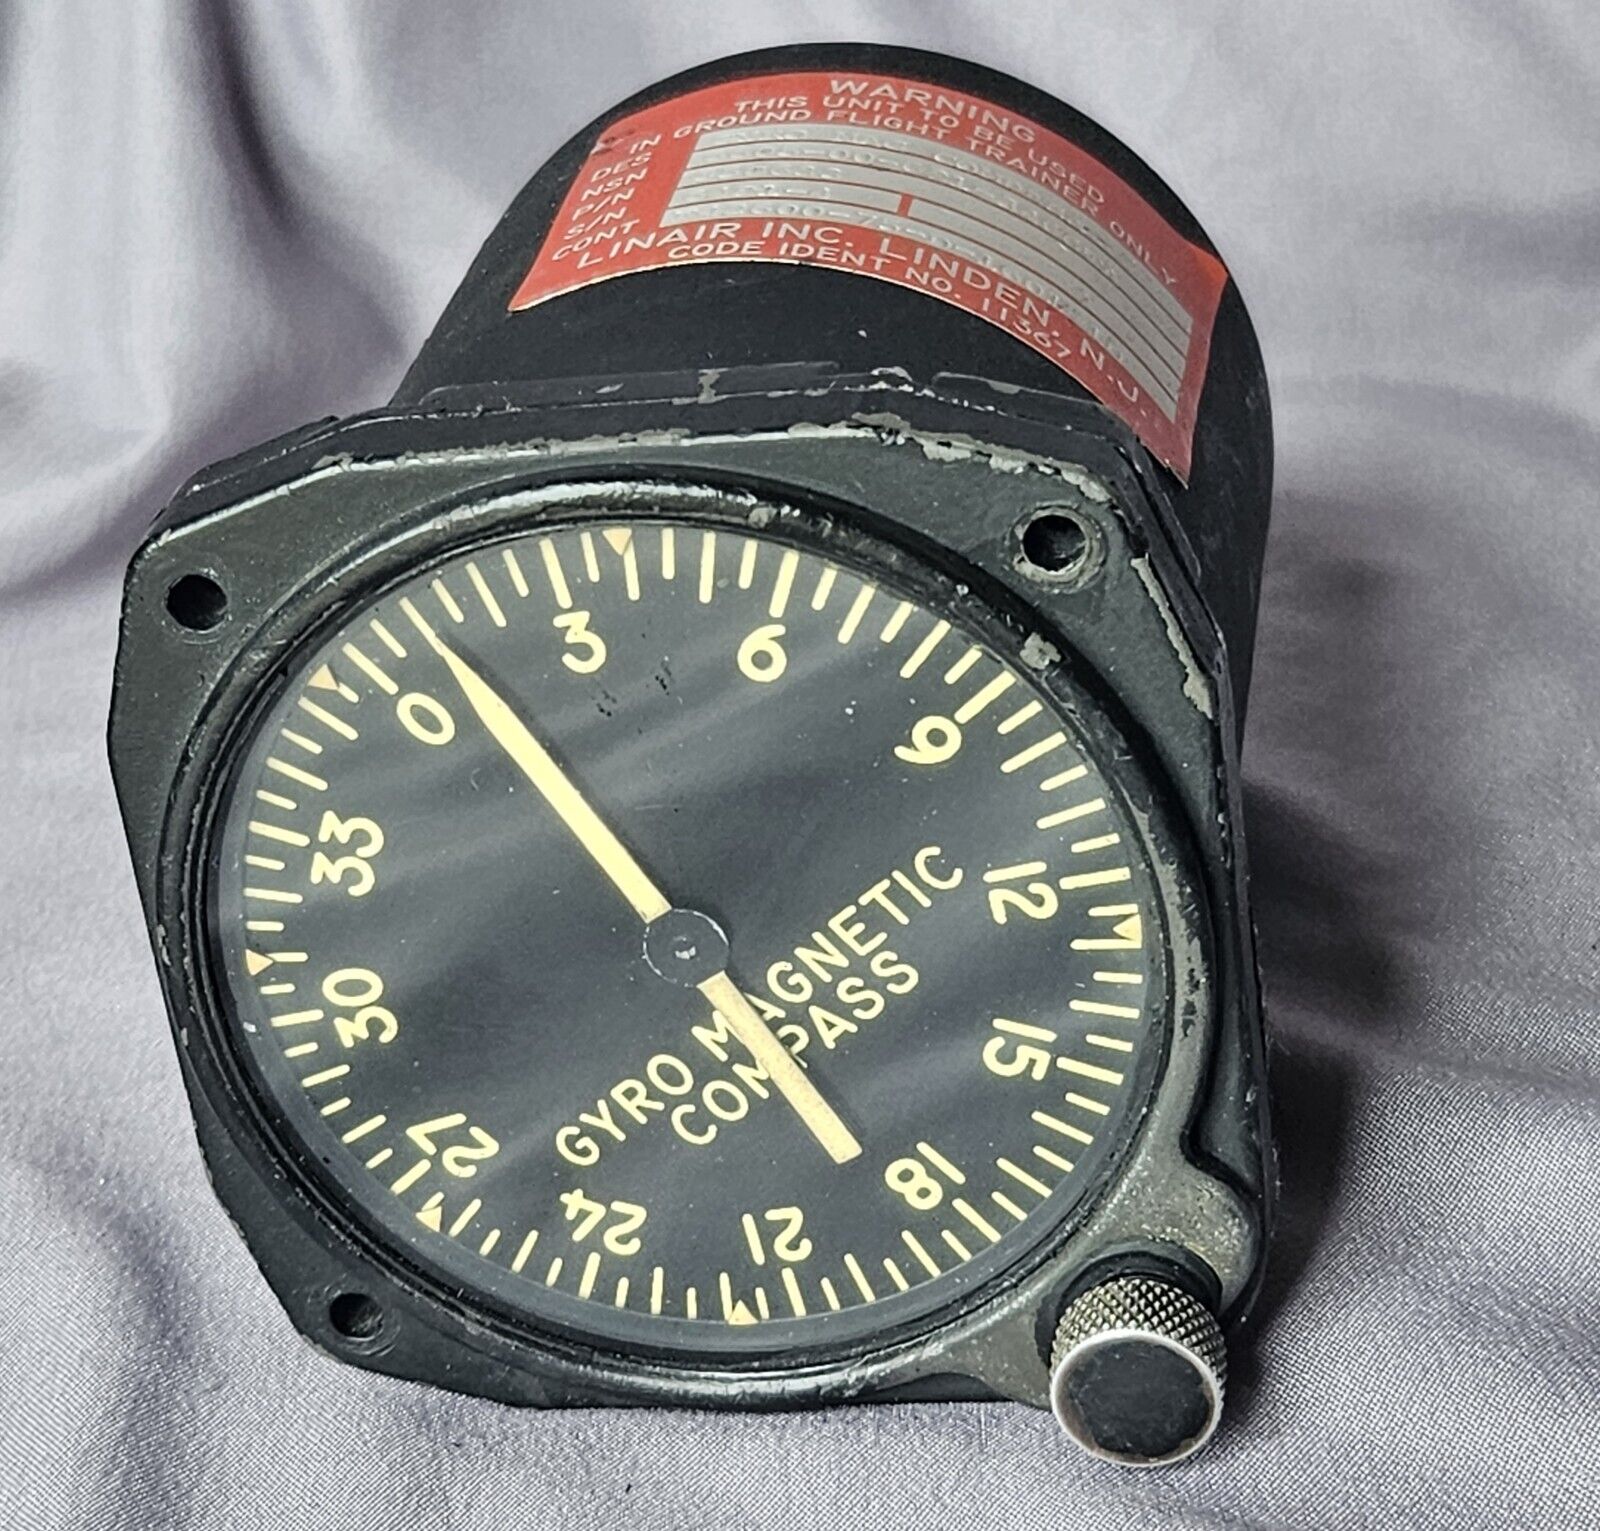  VINTAGE GYRO MAGNETIC COMPASS GAUGE AIRCRAFT TRAINER